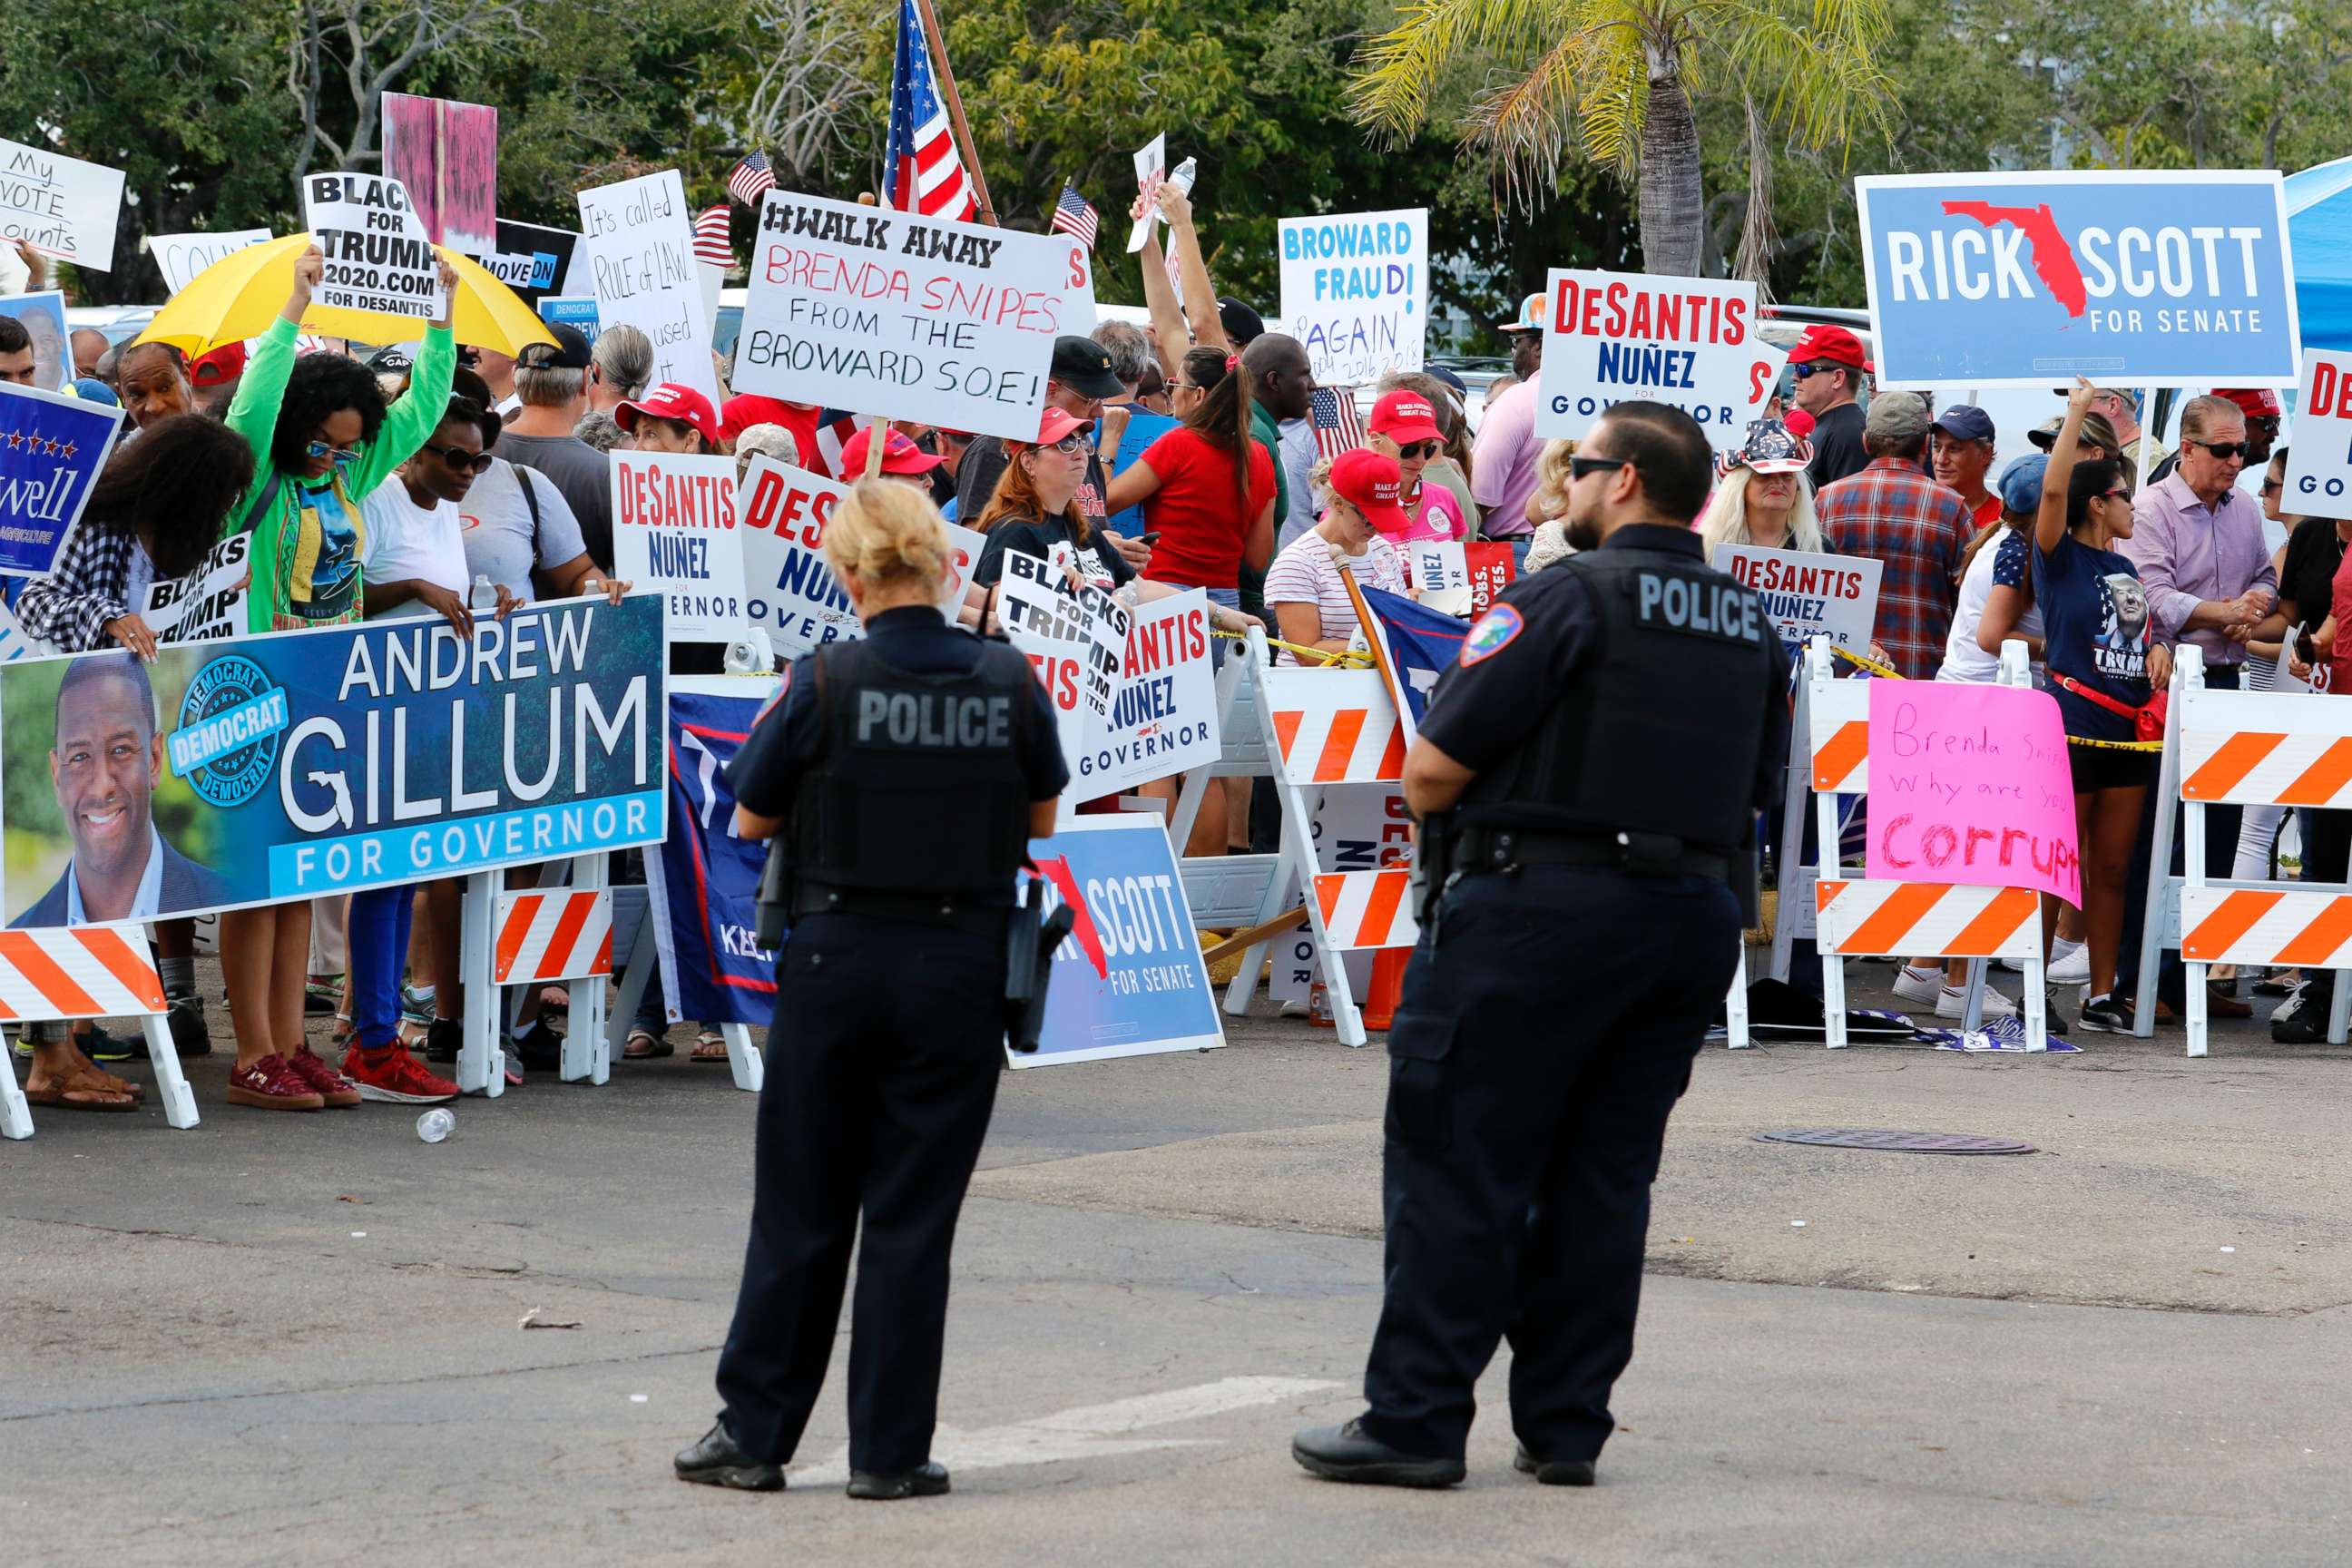 PHOTO: Protesters demonstrate outside the Broward County Supervisor of Elections office on Nov. 10, 2018 in Lauderhill, Fla.